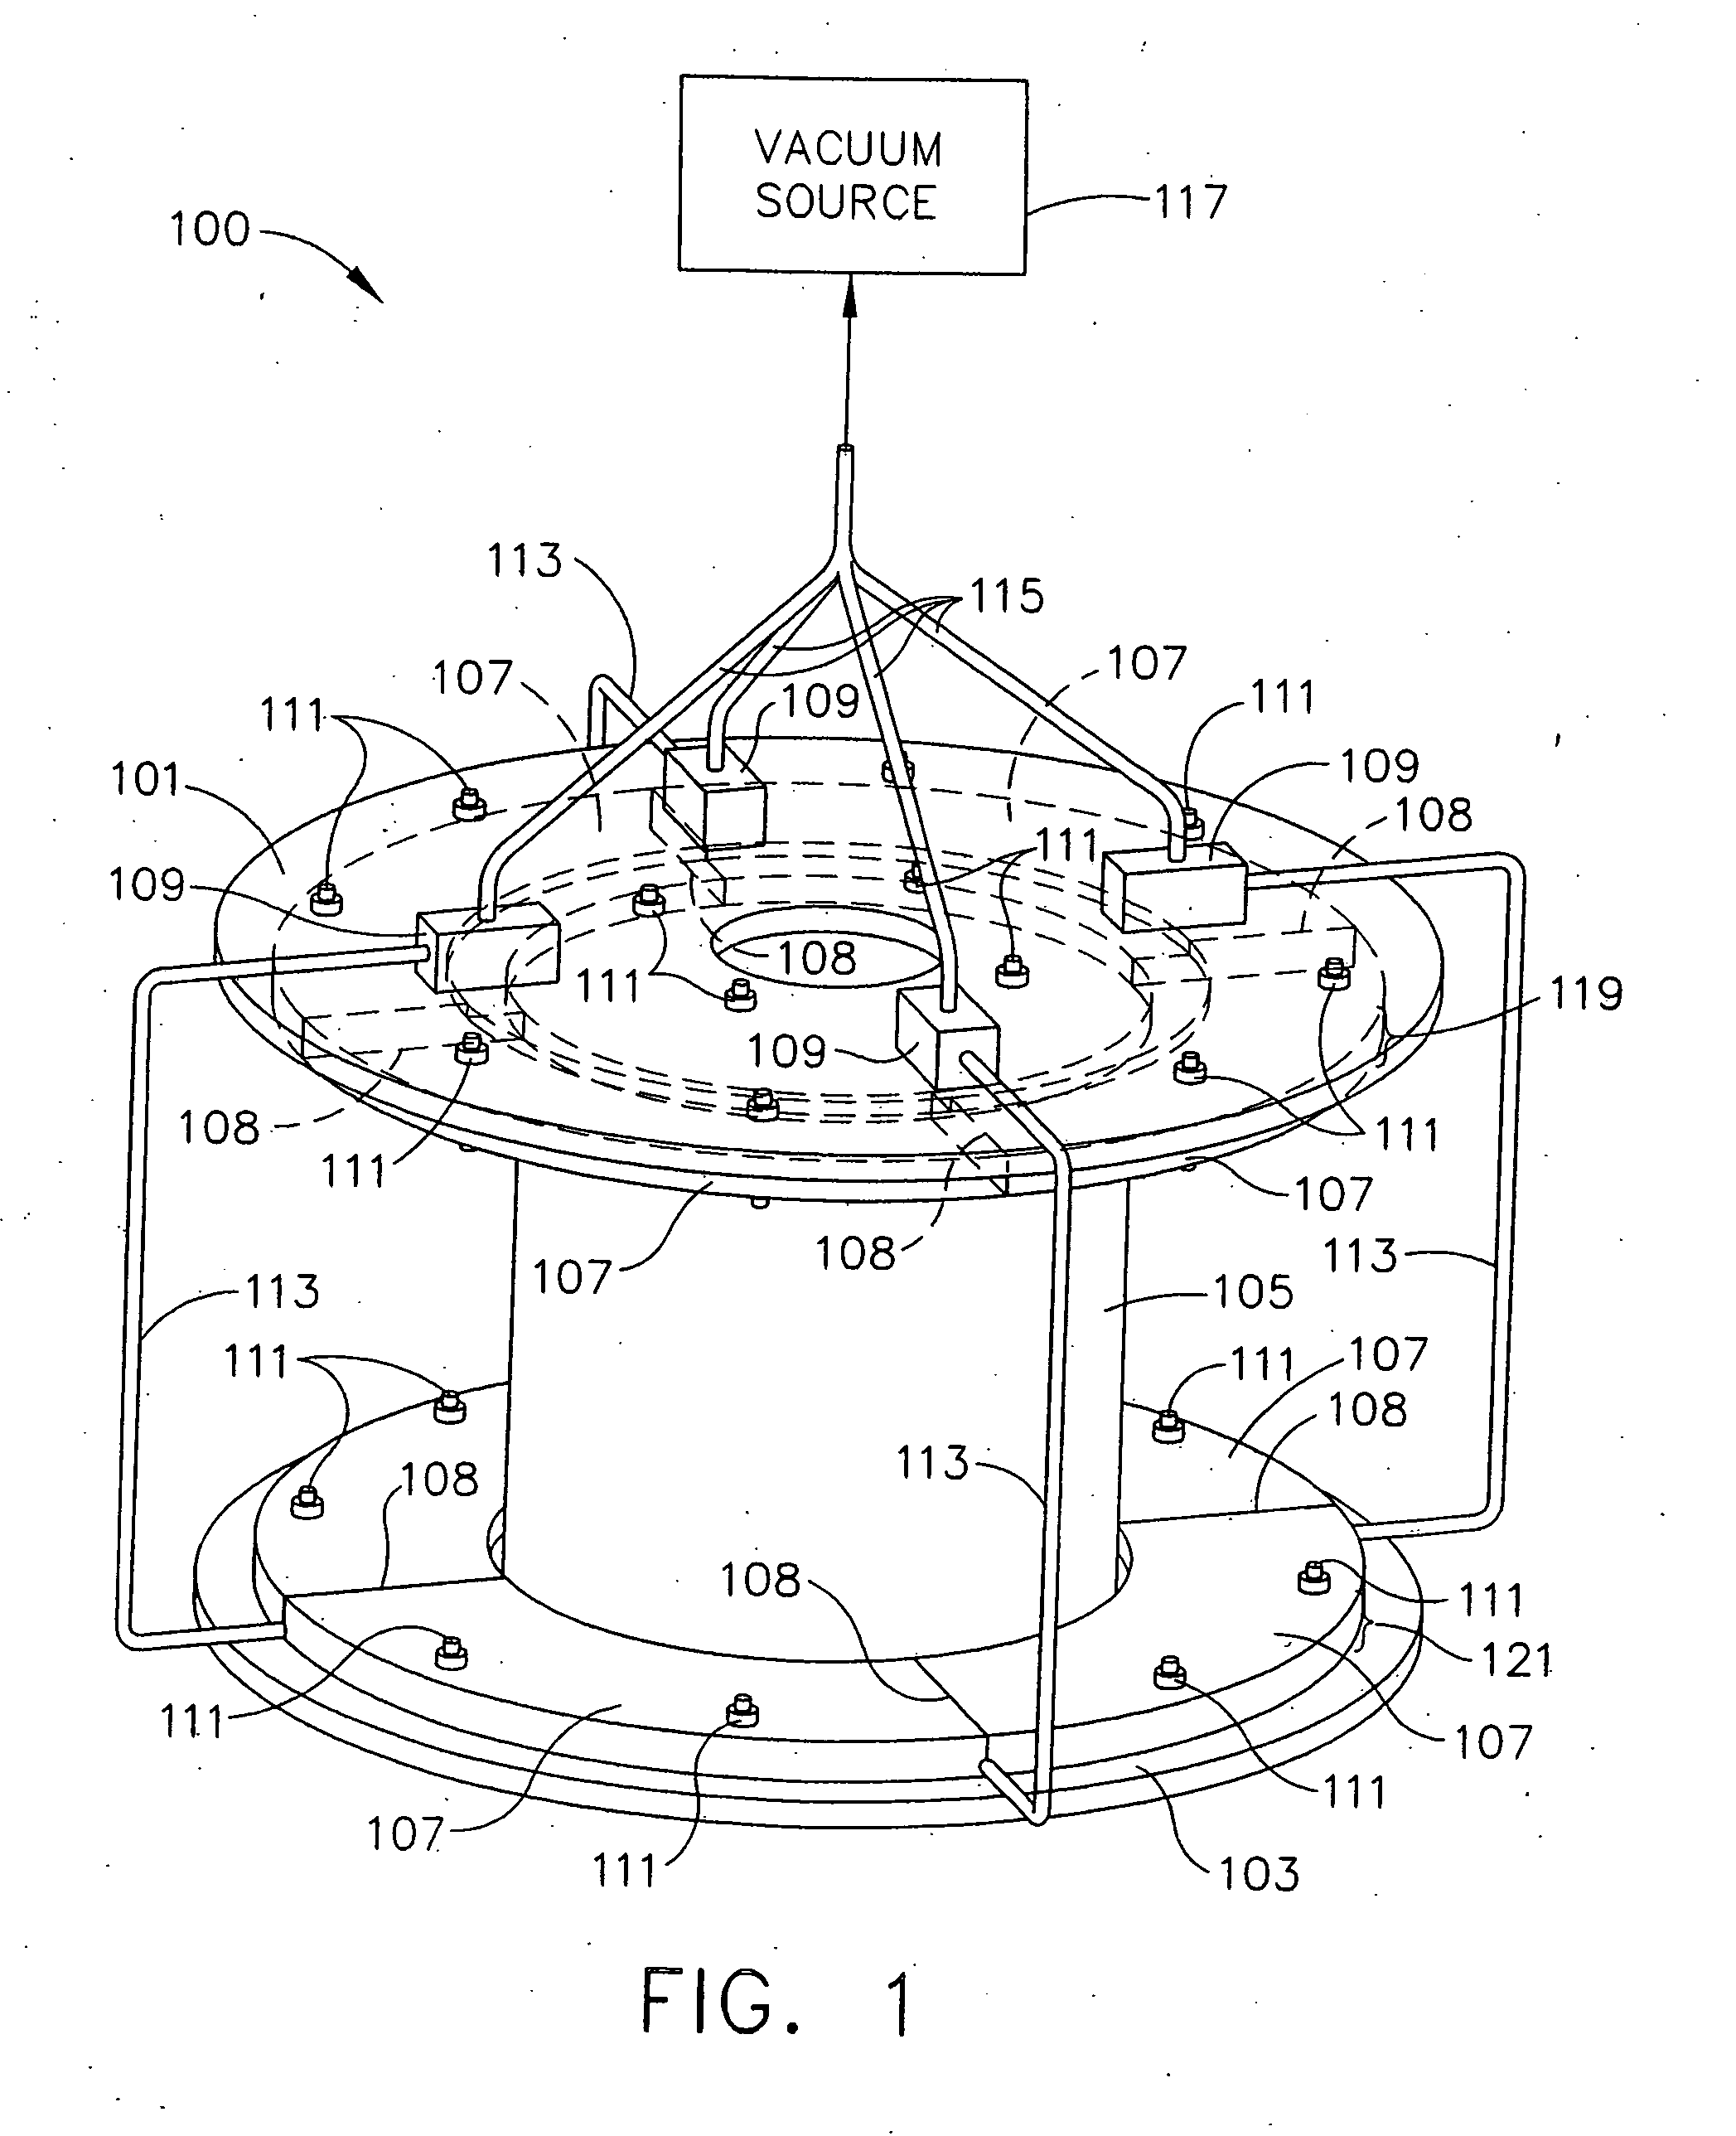 Apparatus for fabricating reinforced composite materials